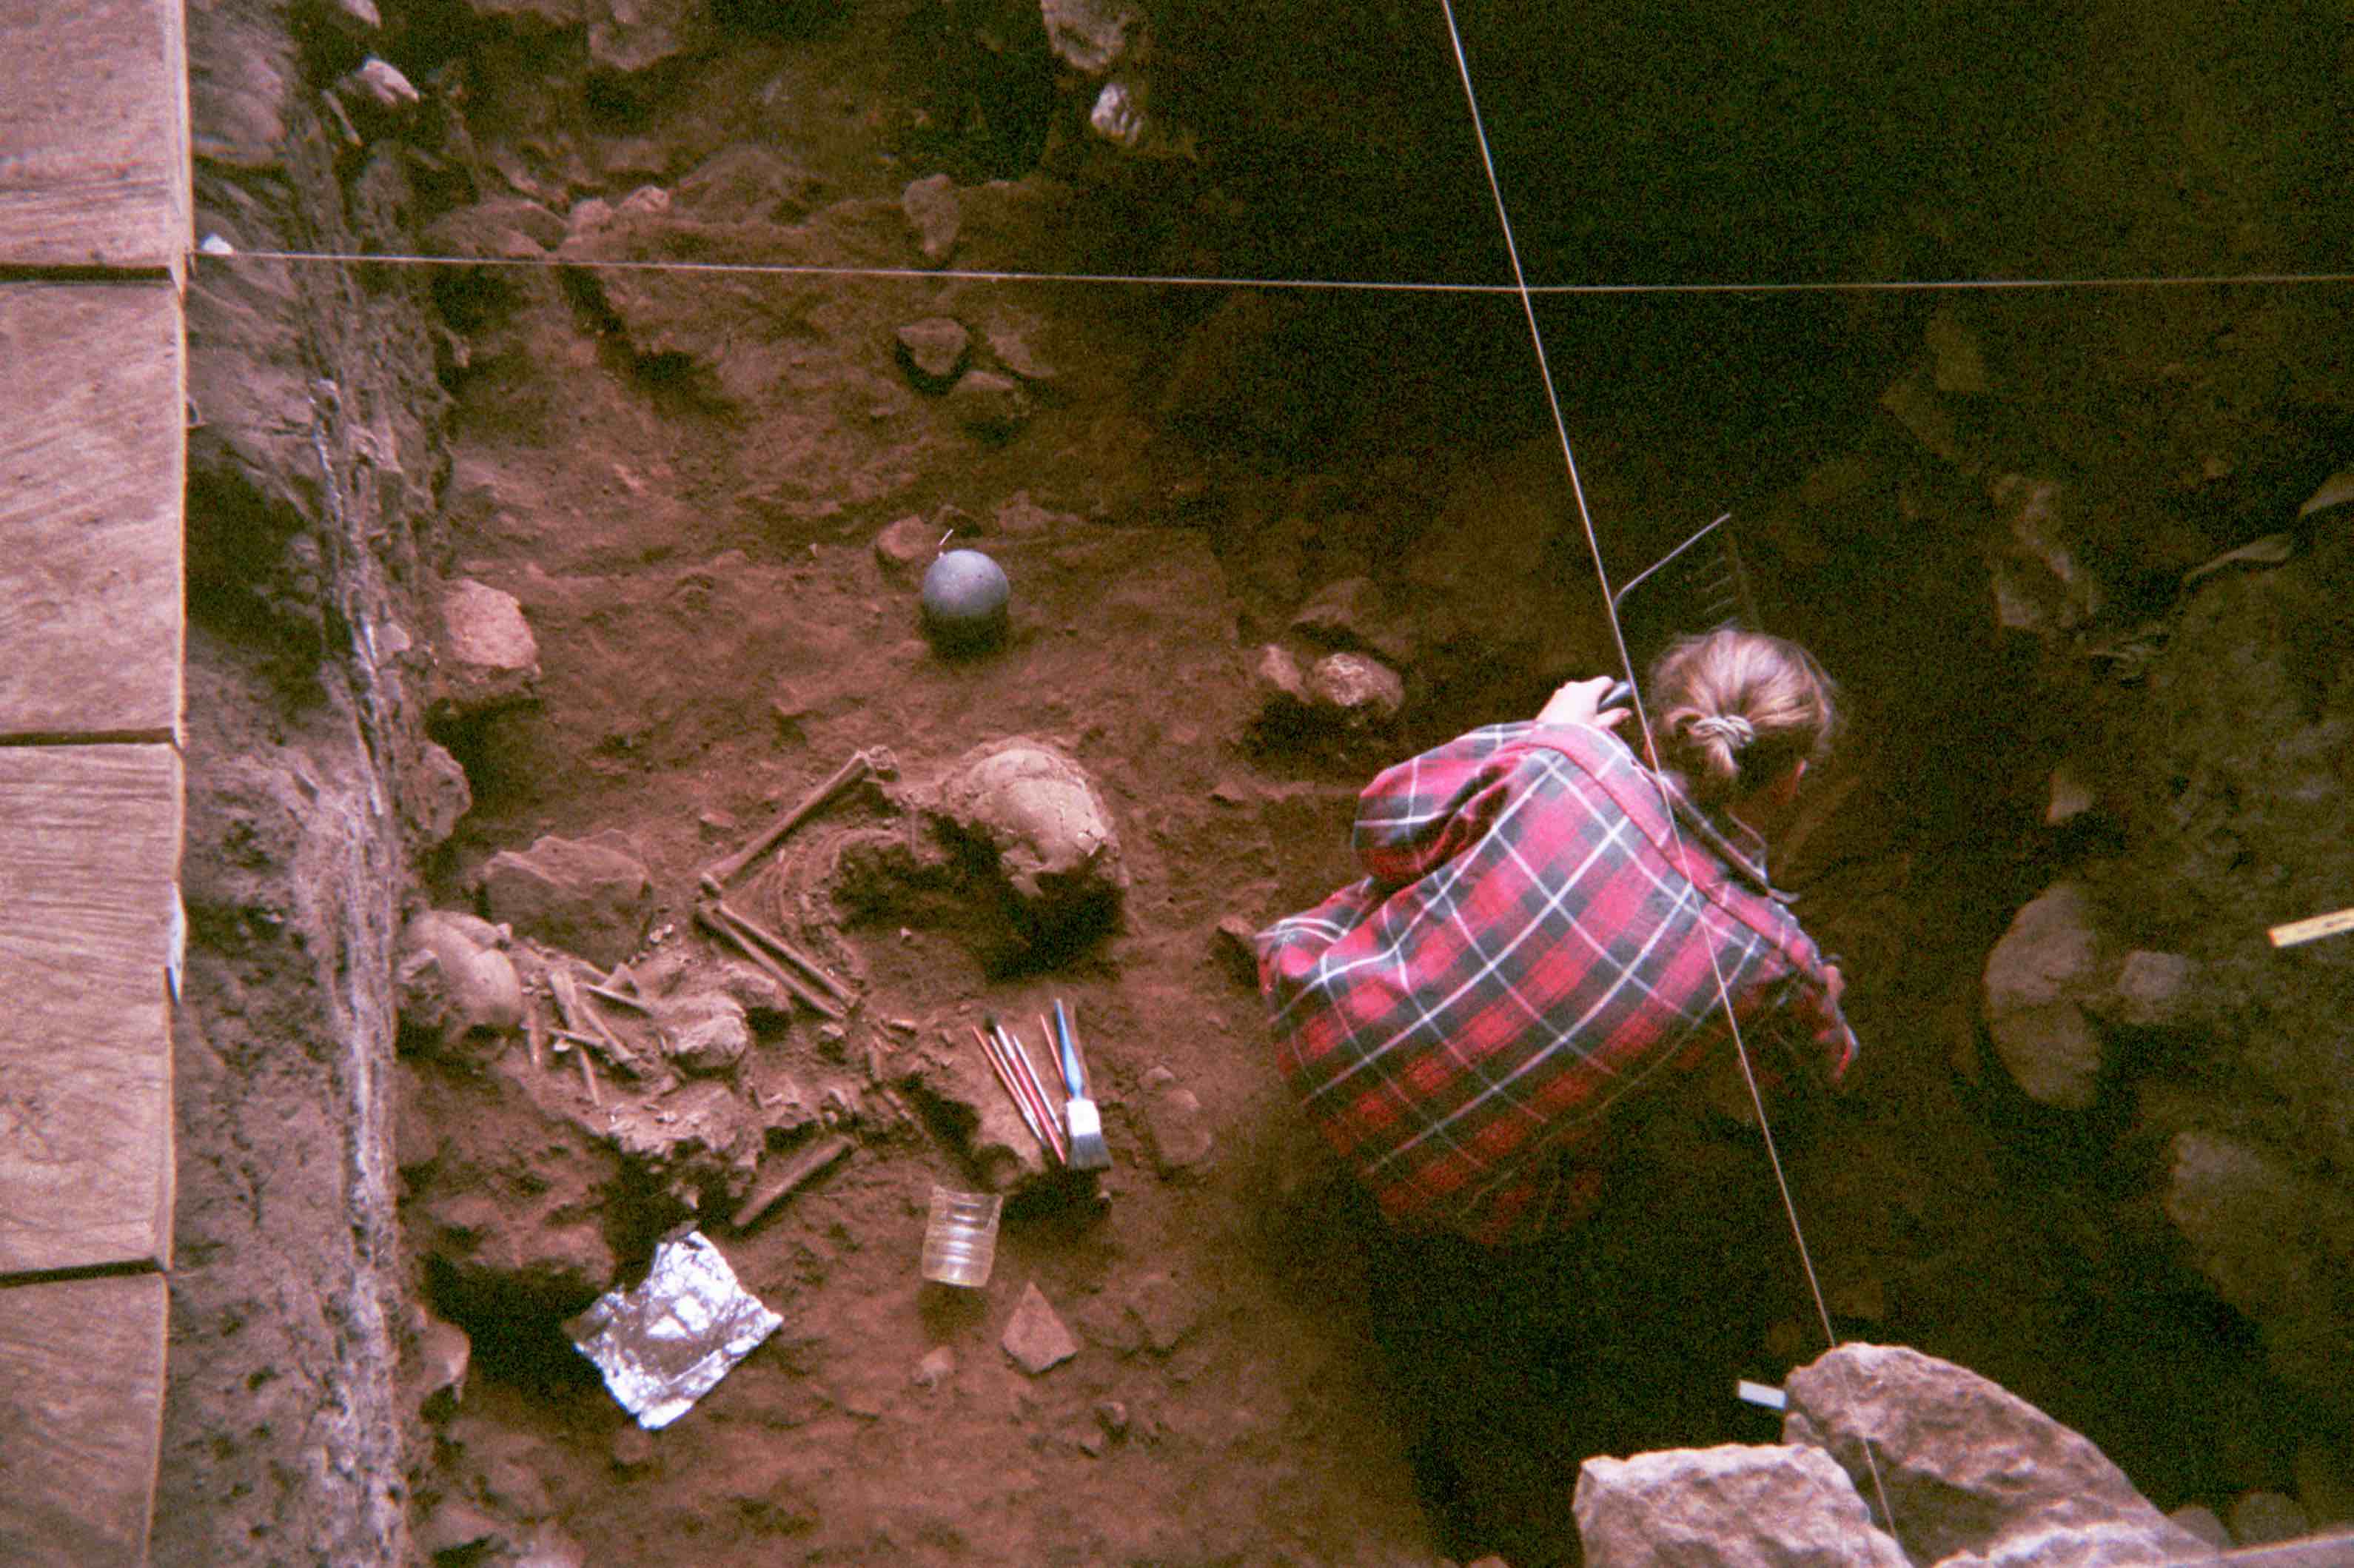 Excavation of a double burial at the Shum Laka rock shelter in Cameroon, which contains the remains of two children who lived circa 8,000 years ago and were genetically from the same family (foto de Isabelle Ribot, enero de 1994).